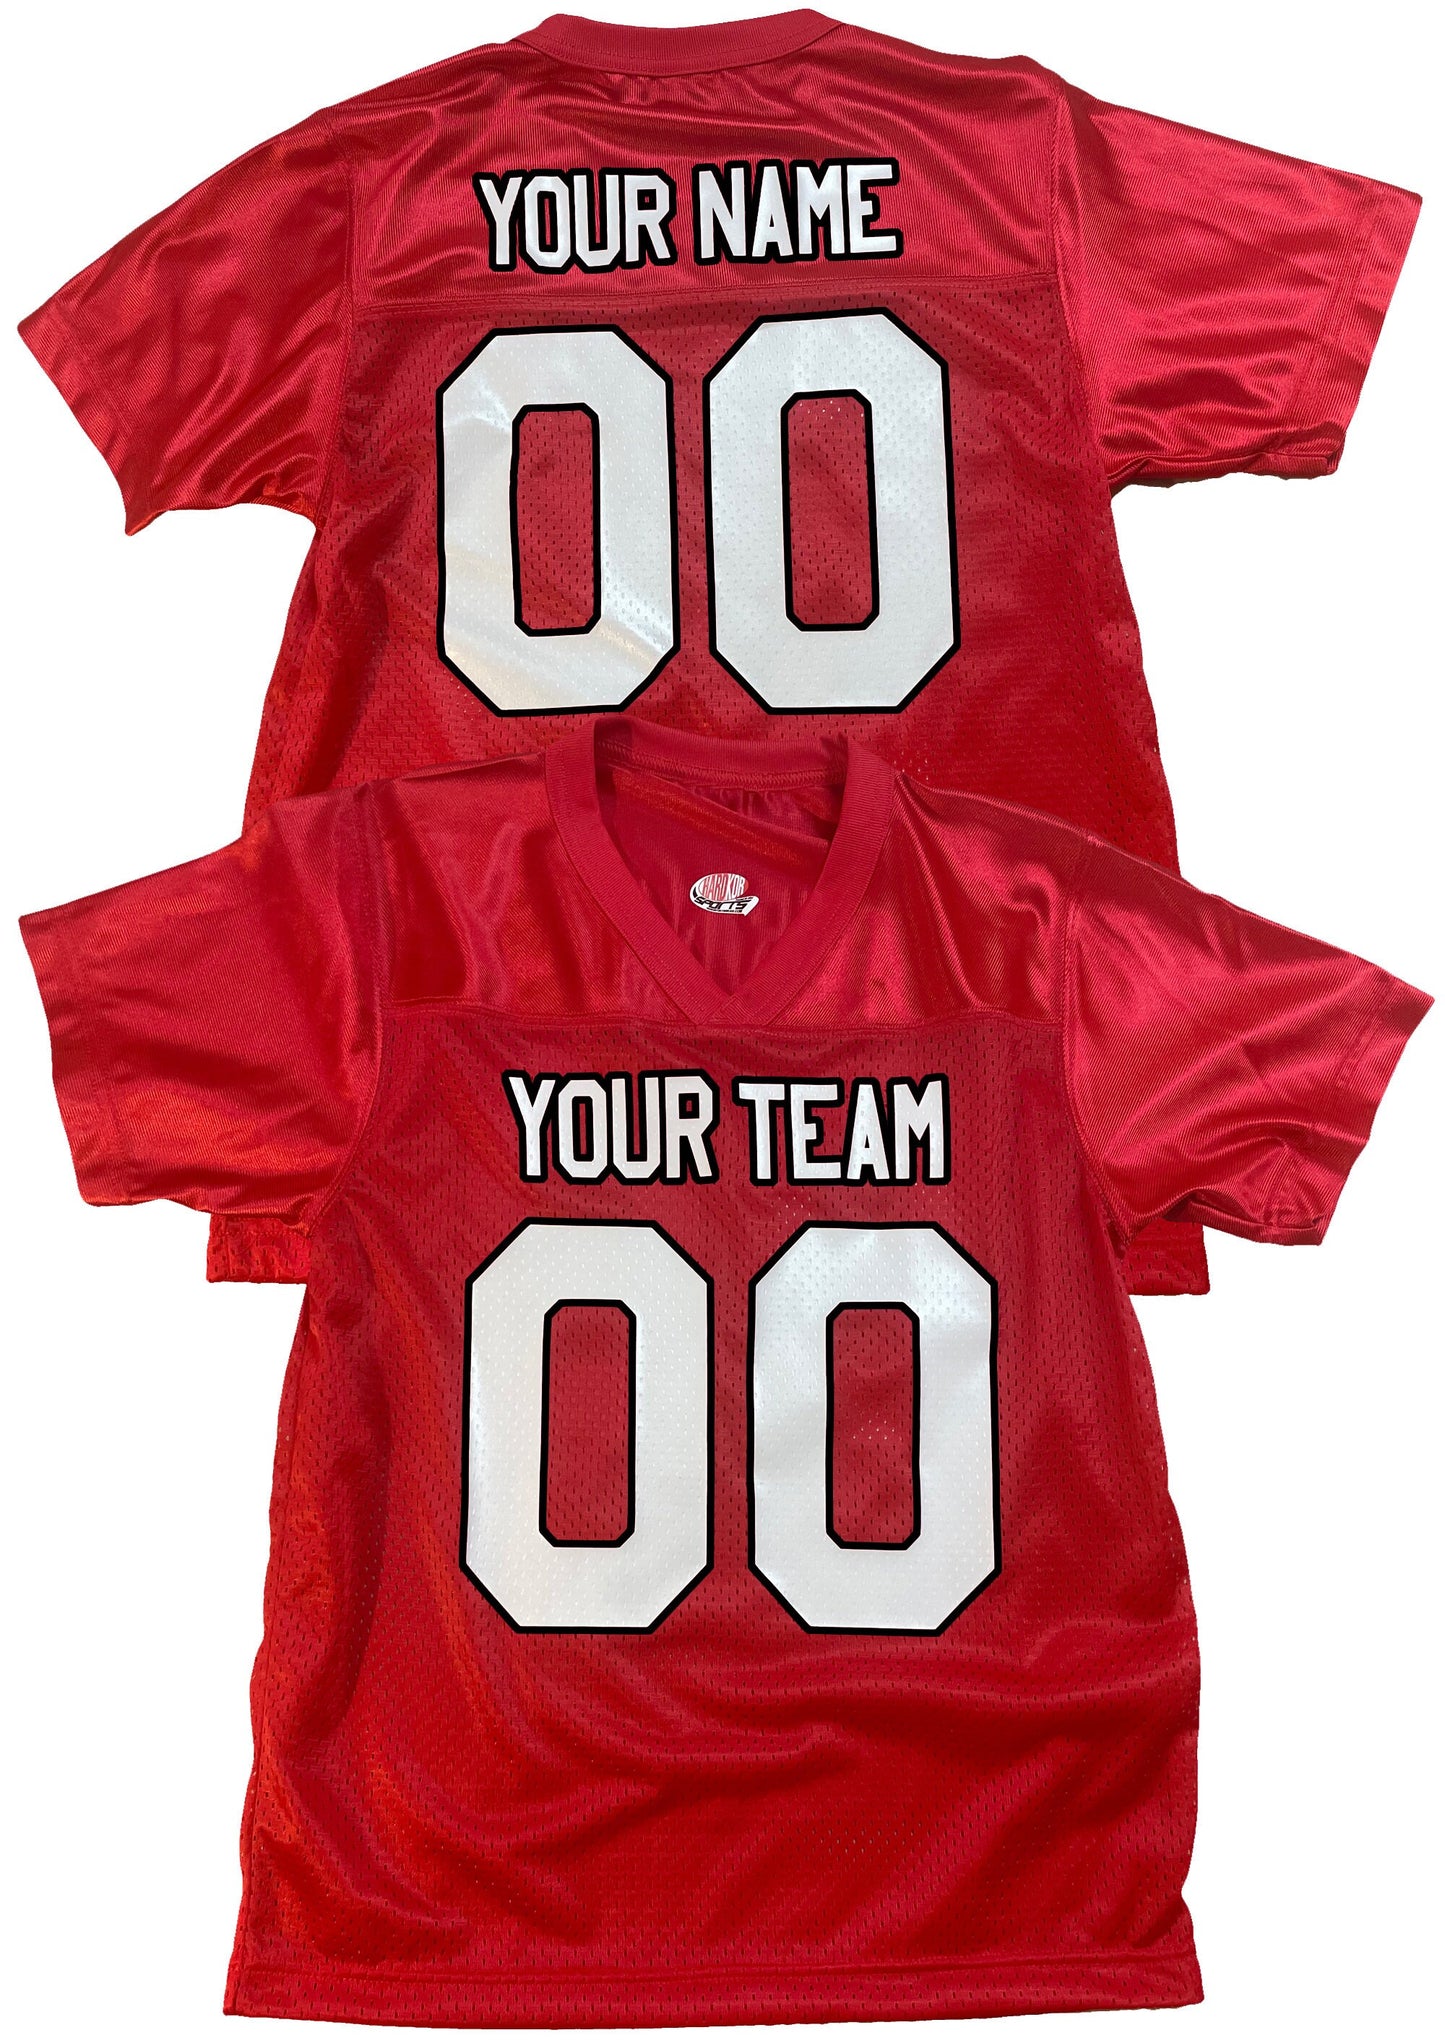 2 Color Print, Custom Football Jersey, Fantasy Football, Casual Fit Fan Shirt | Outlined Text, Team Name, Player Name, Numbers